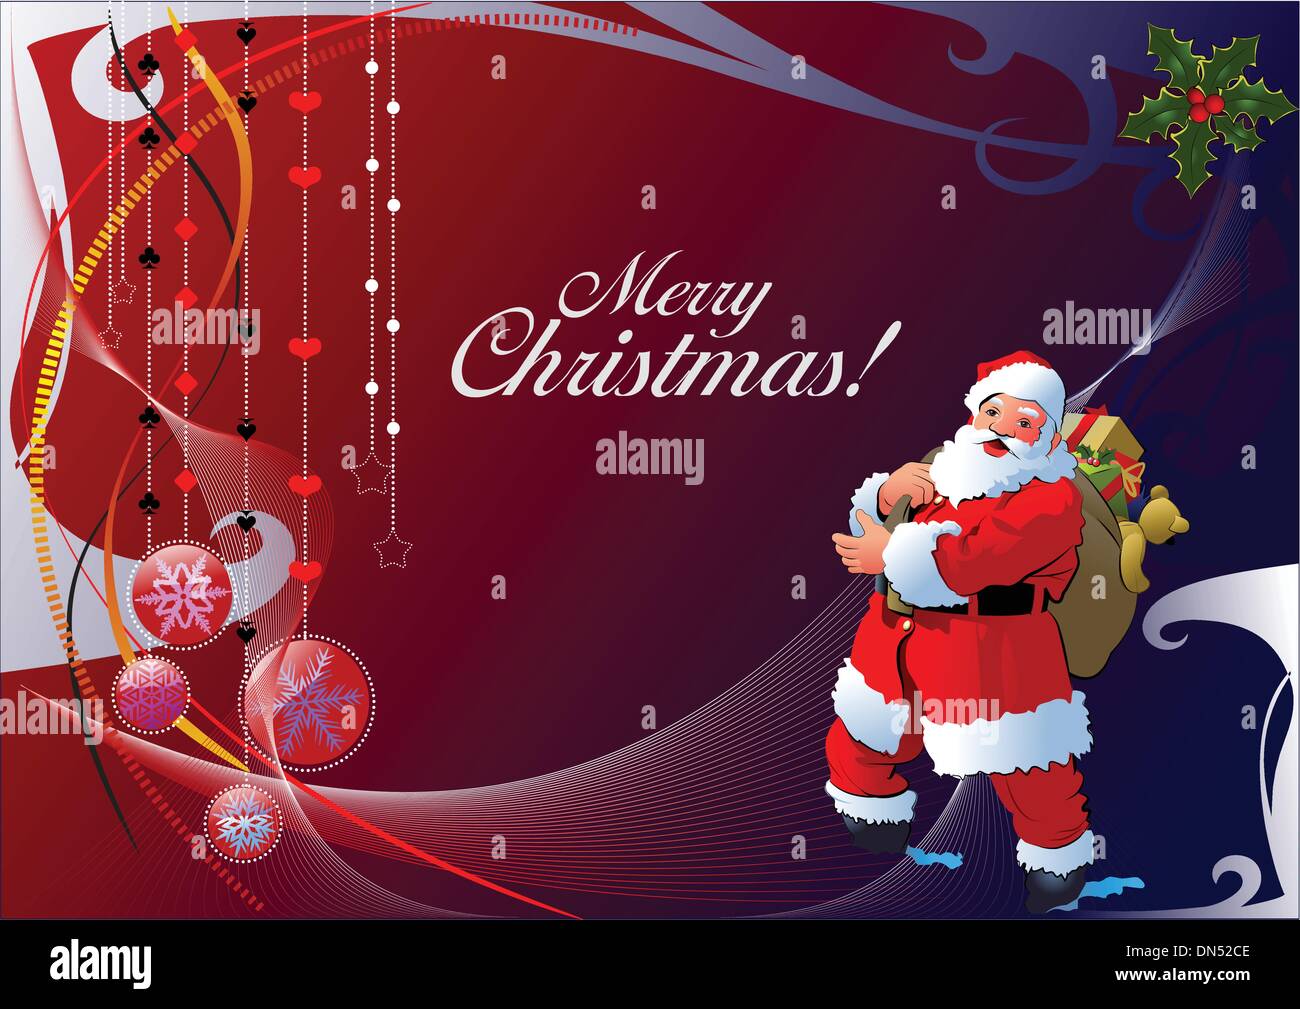 Christmas - New Year shine card with balls and Santa images. Stock Vector